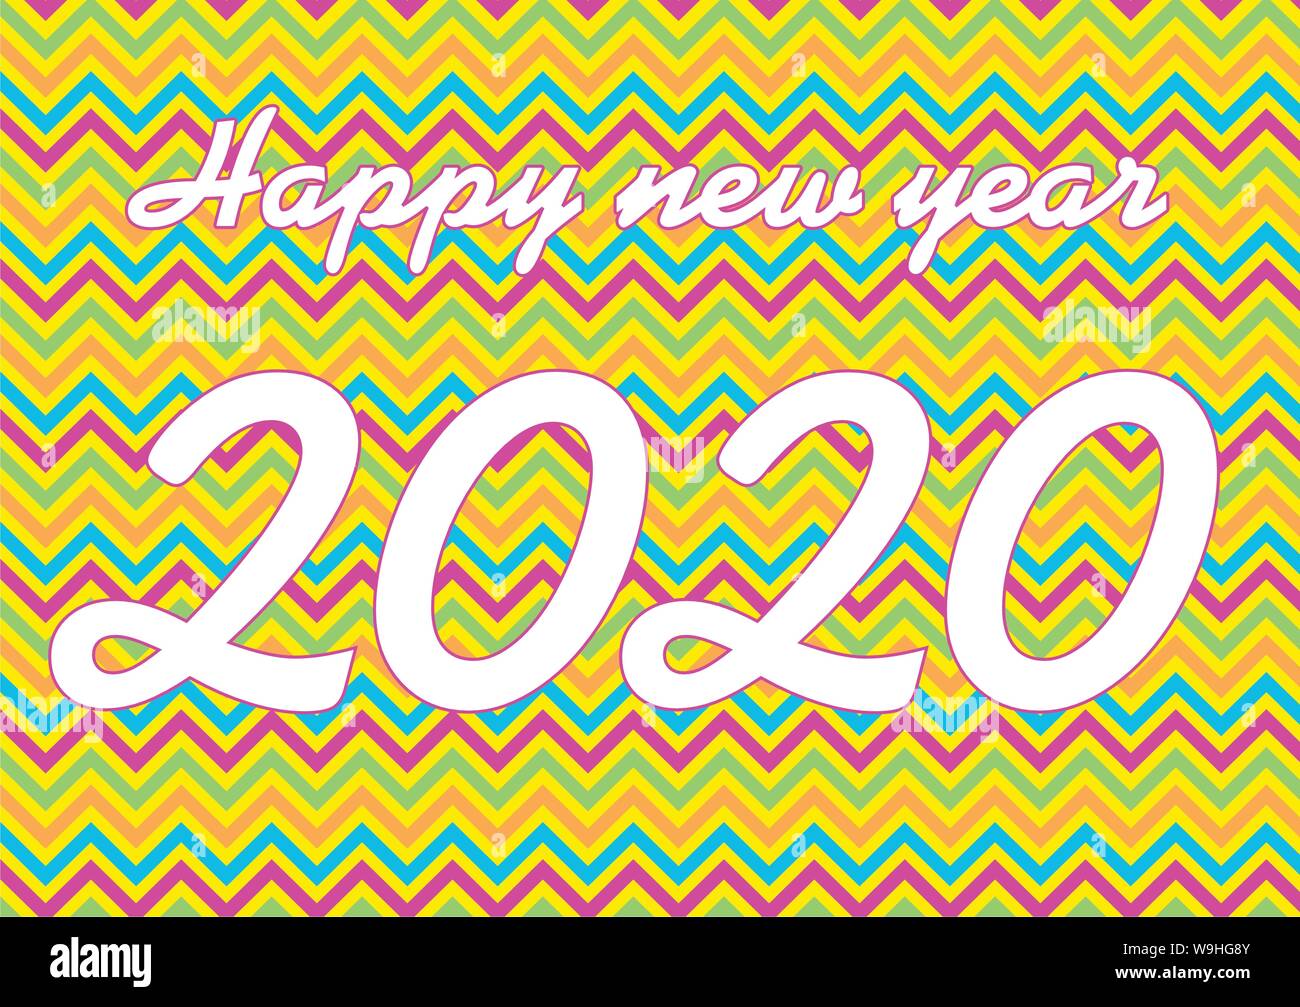 Welcome 2020 illustration vector greeting Stock Vector